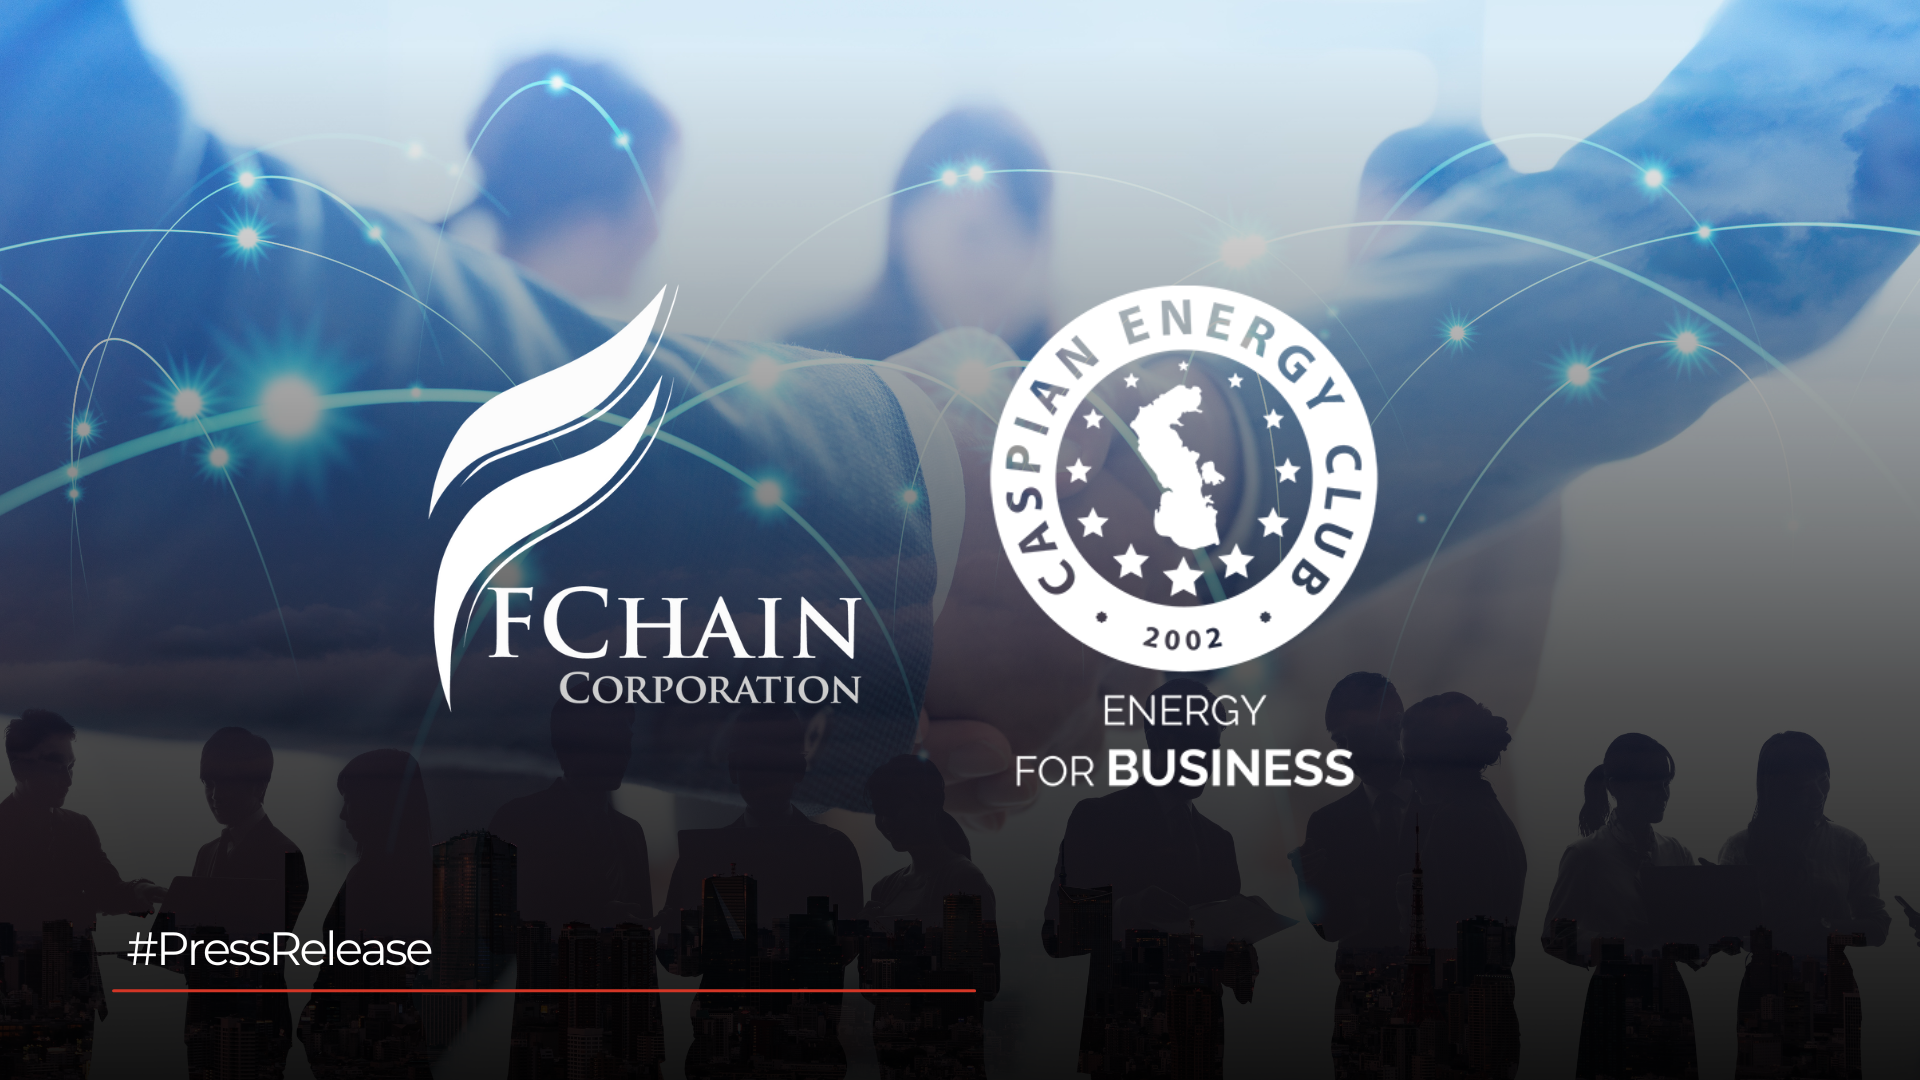 FCHAIN Participates at the CEO Breakfast Organized by the Caspian Energy Club